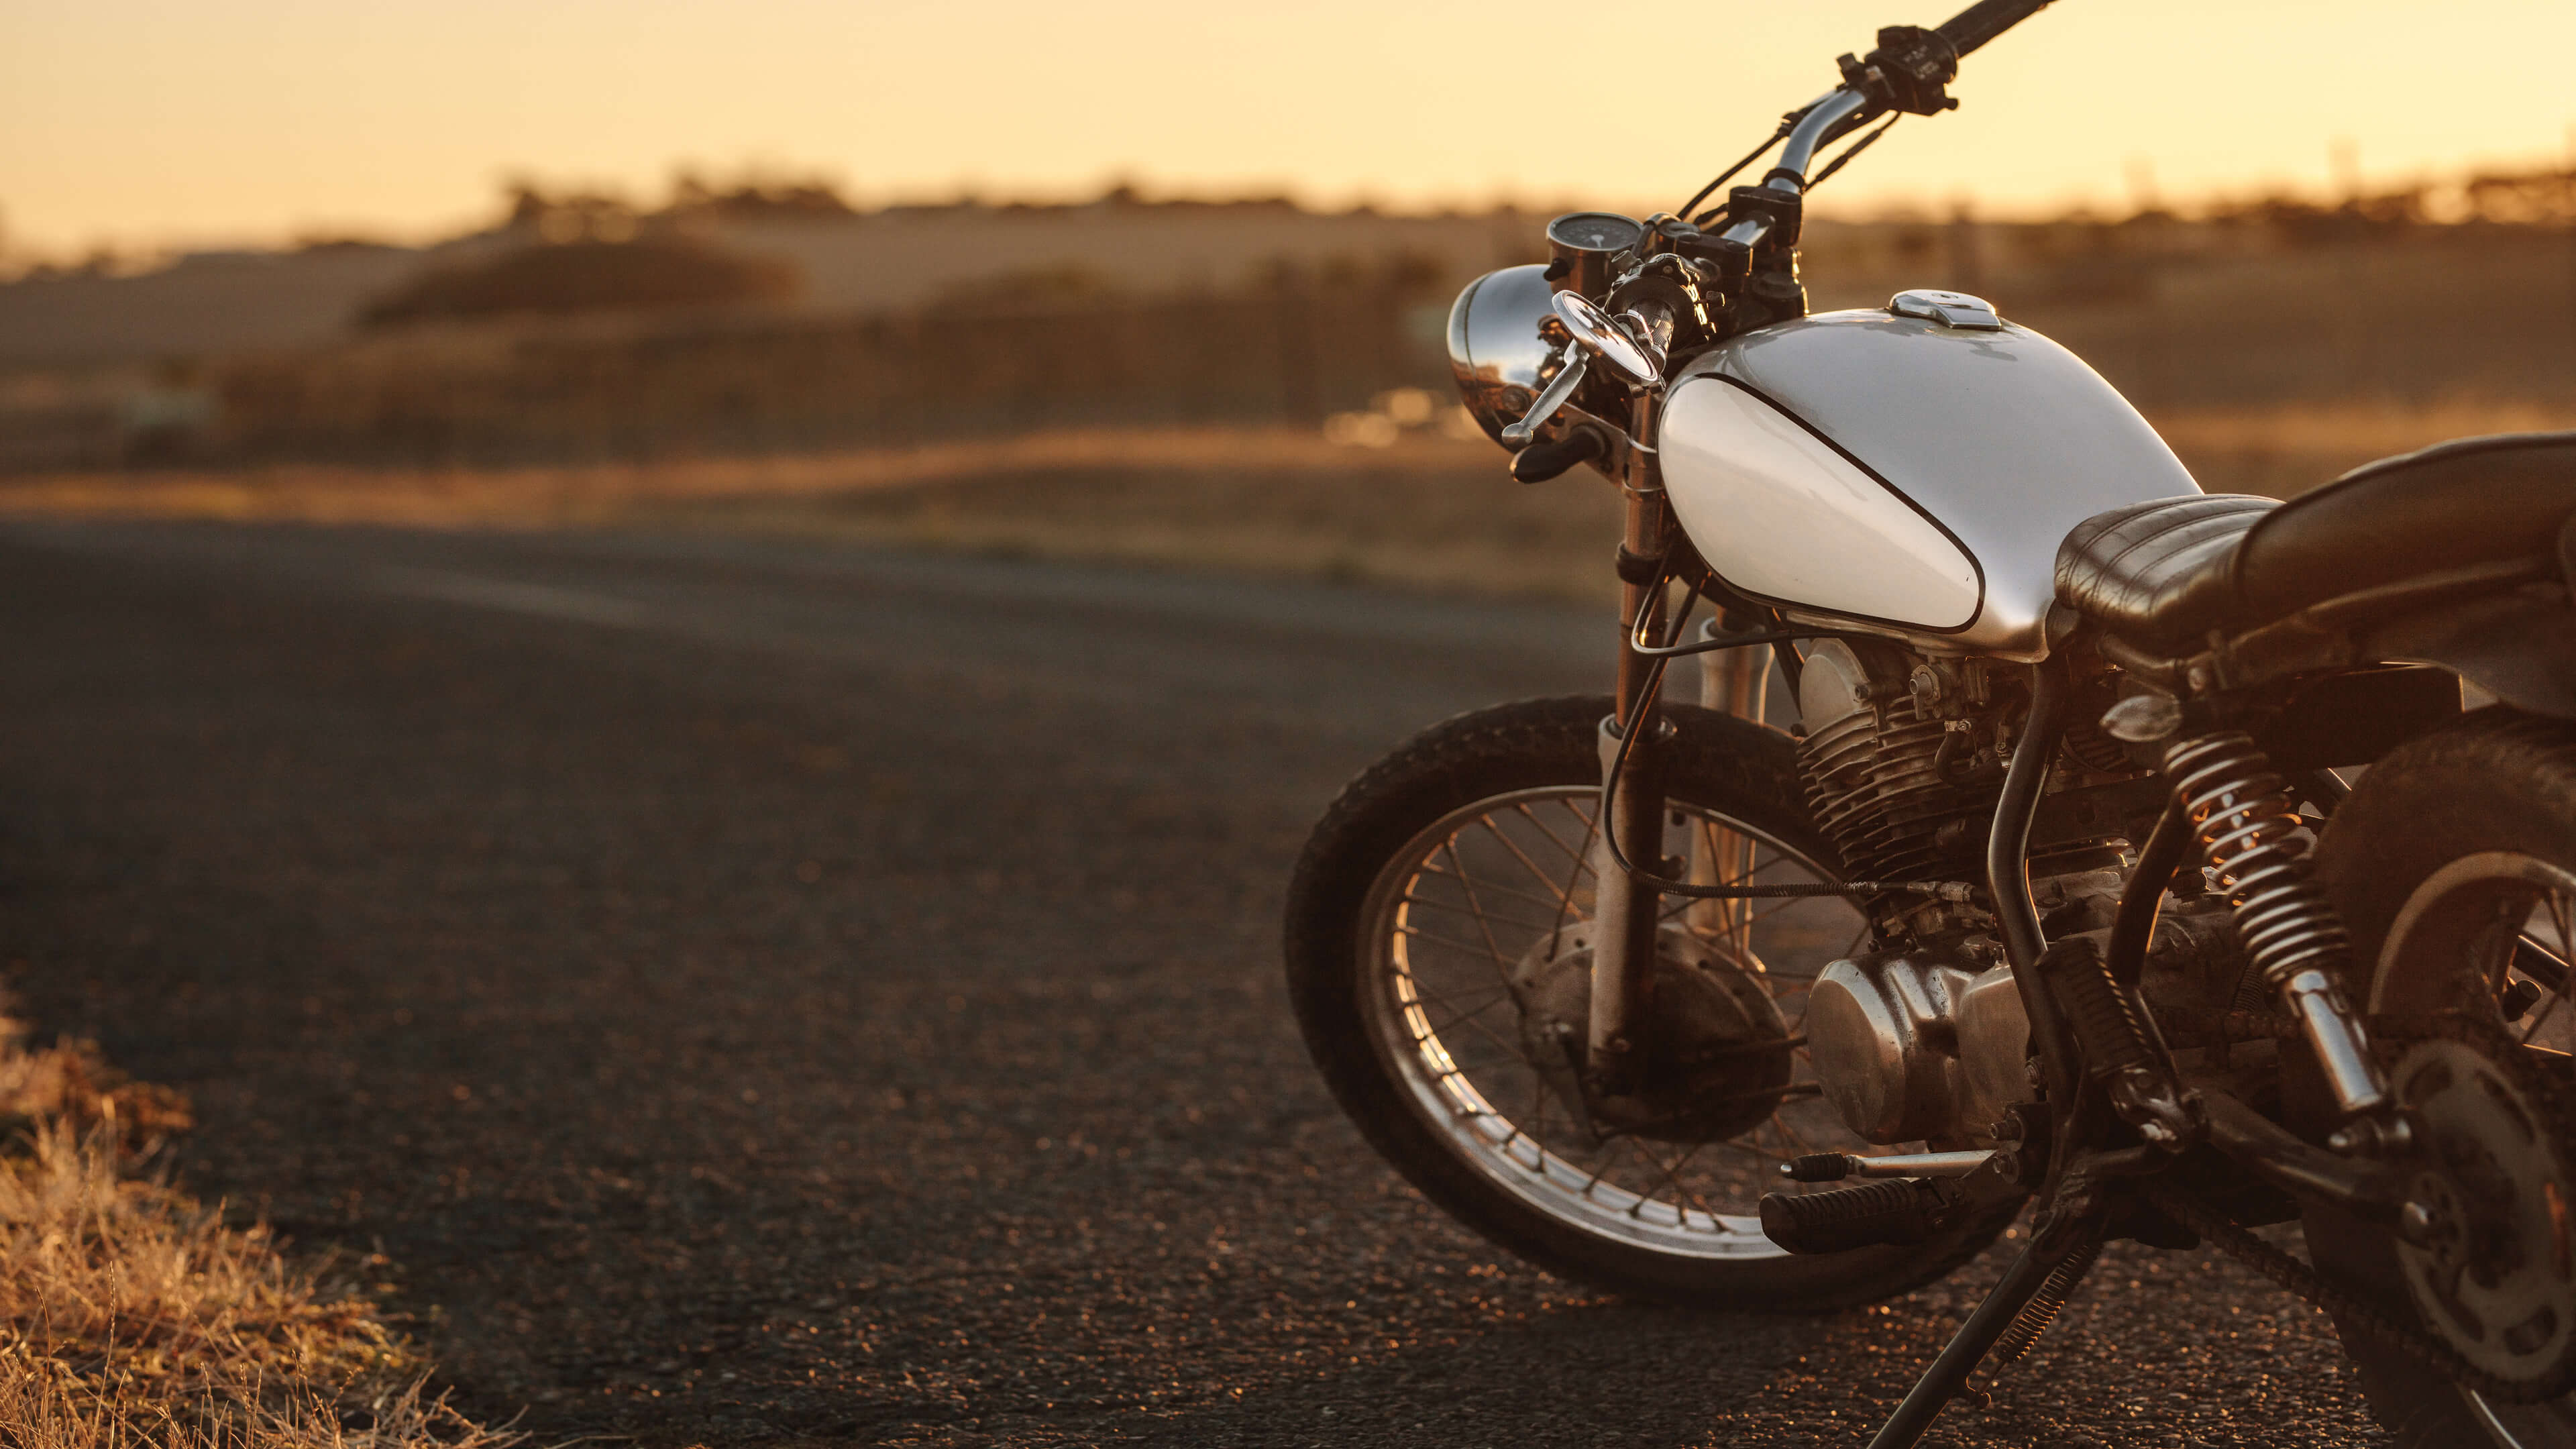 4K Vintage Motorcycles Wallpapers Free Wallpaper Collection - Peapix